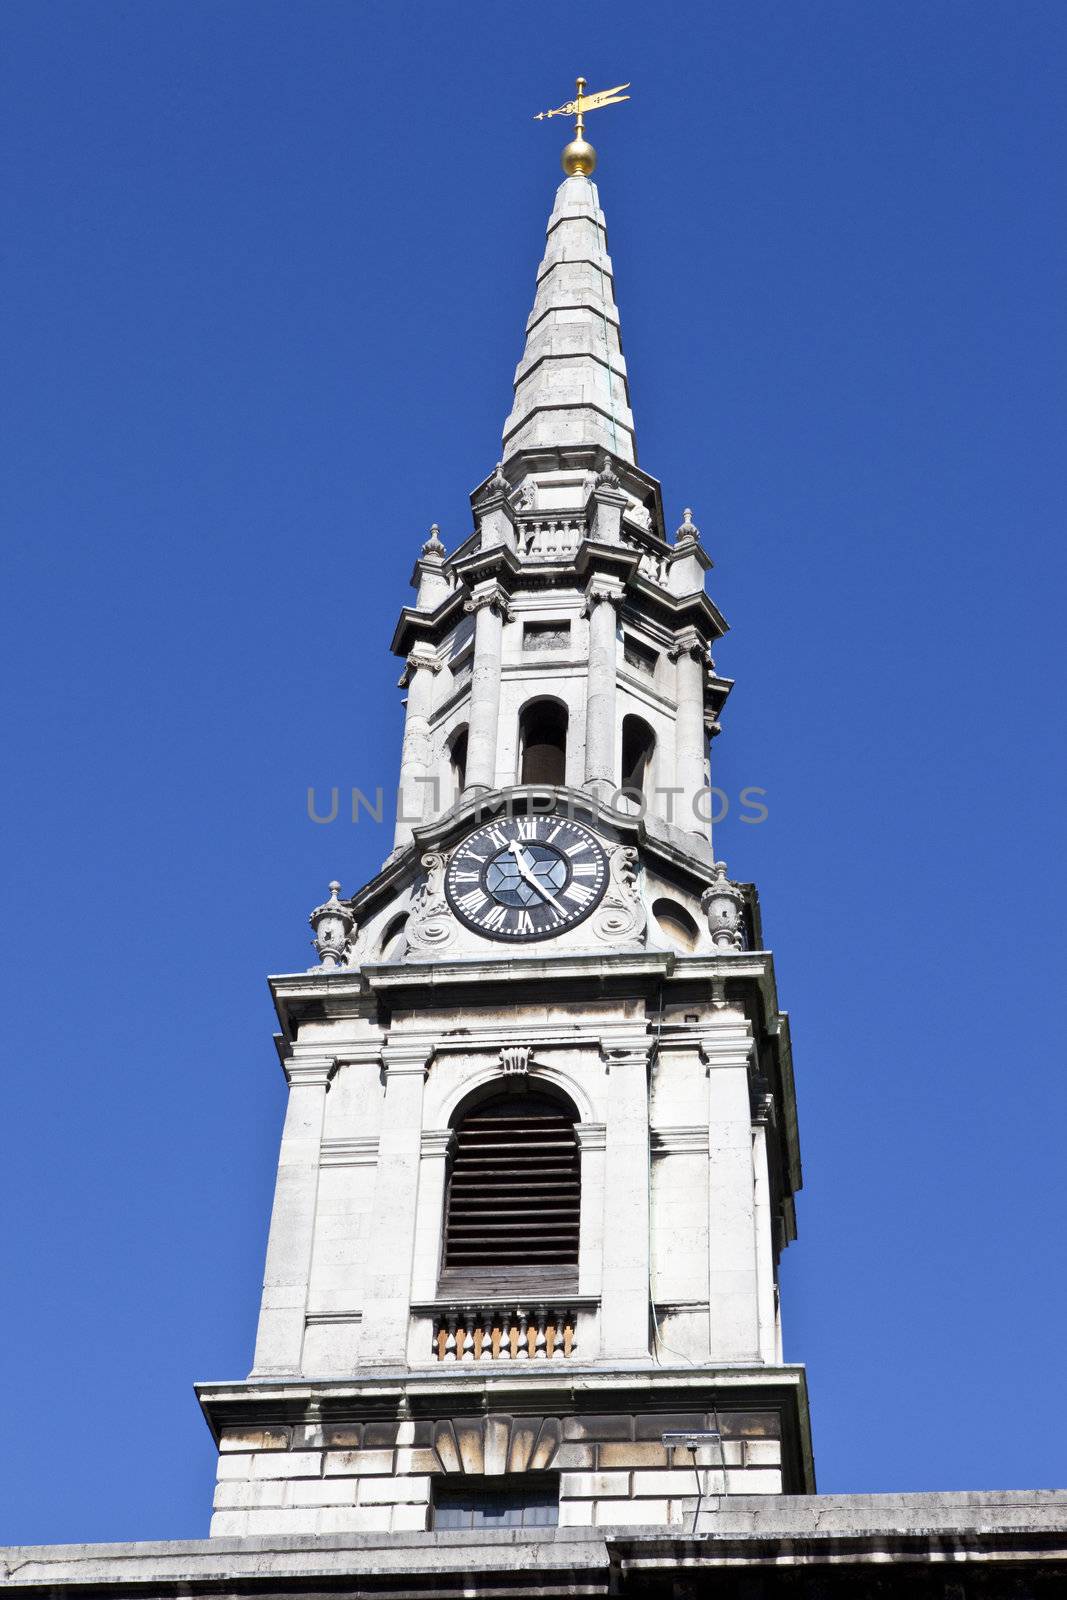 Church of St. Giles-in-the-Fields in London.